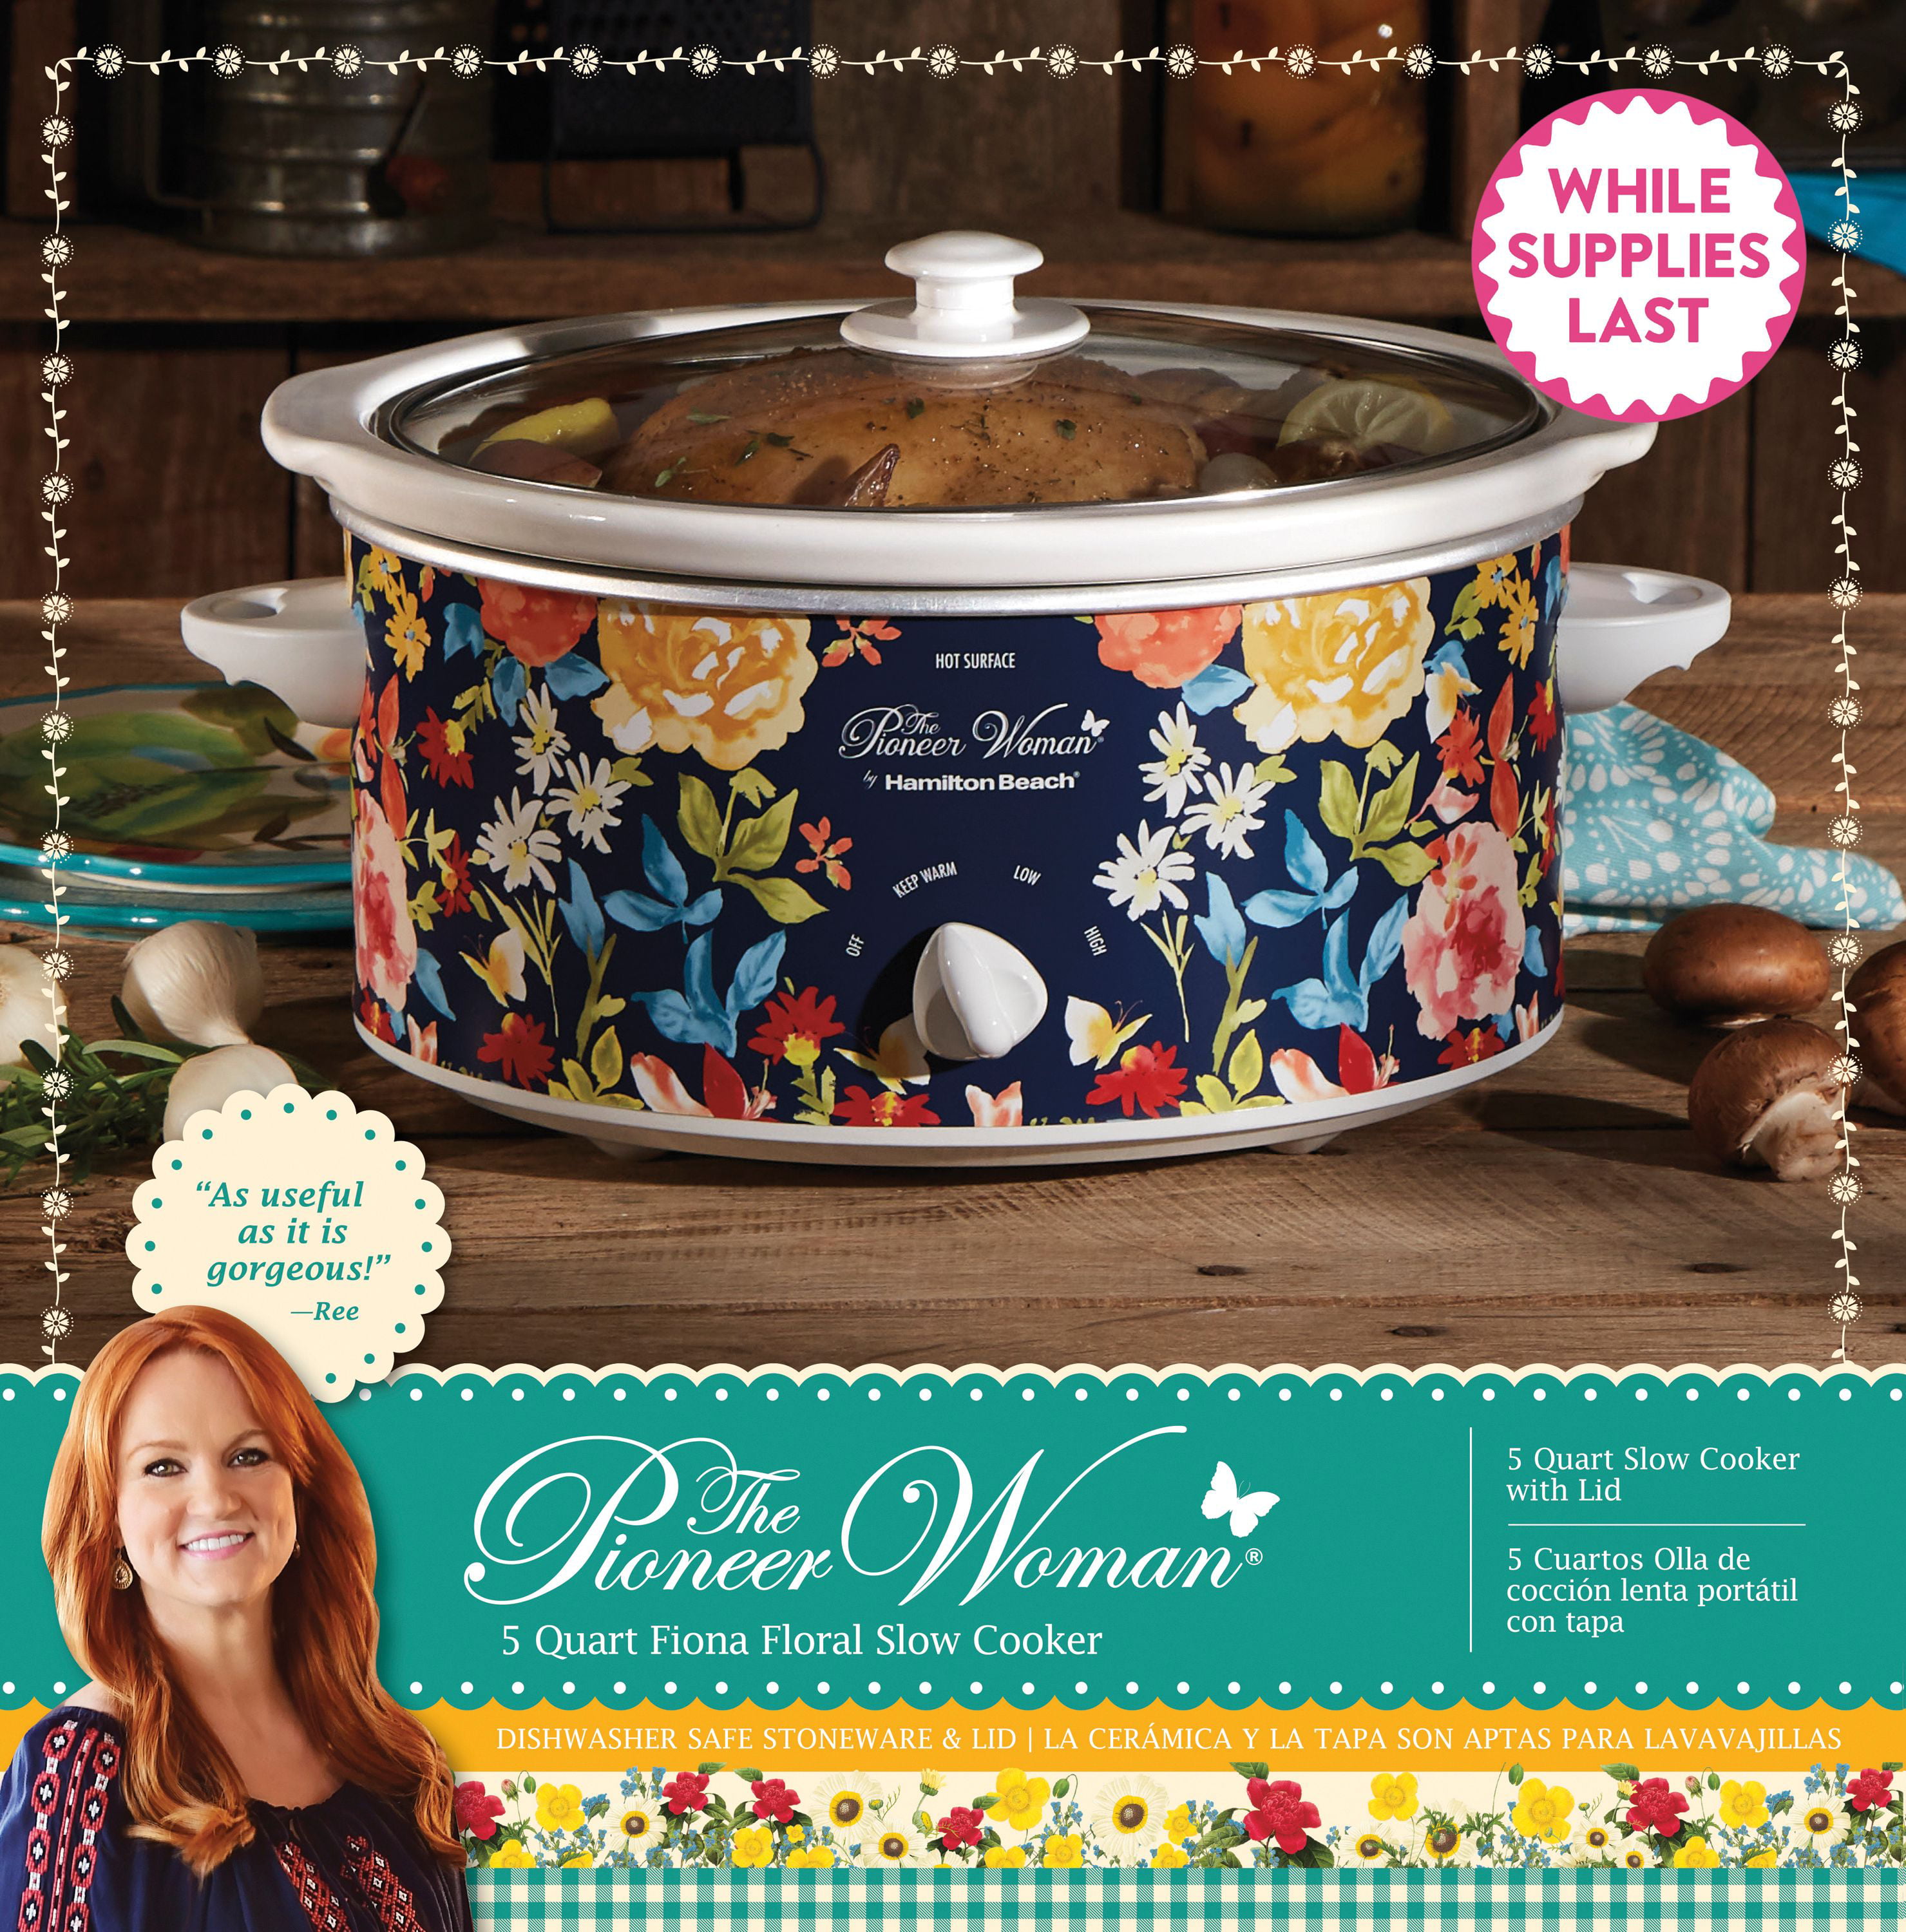  The Bake Shop Pioneer Woman Small 1.5 Quart Slow